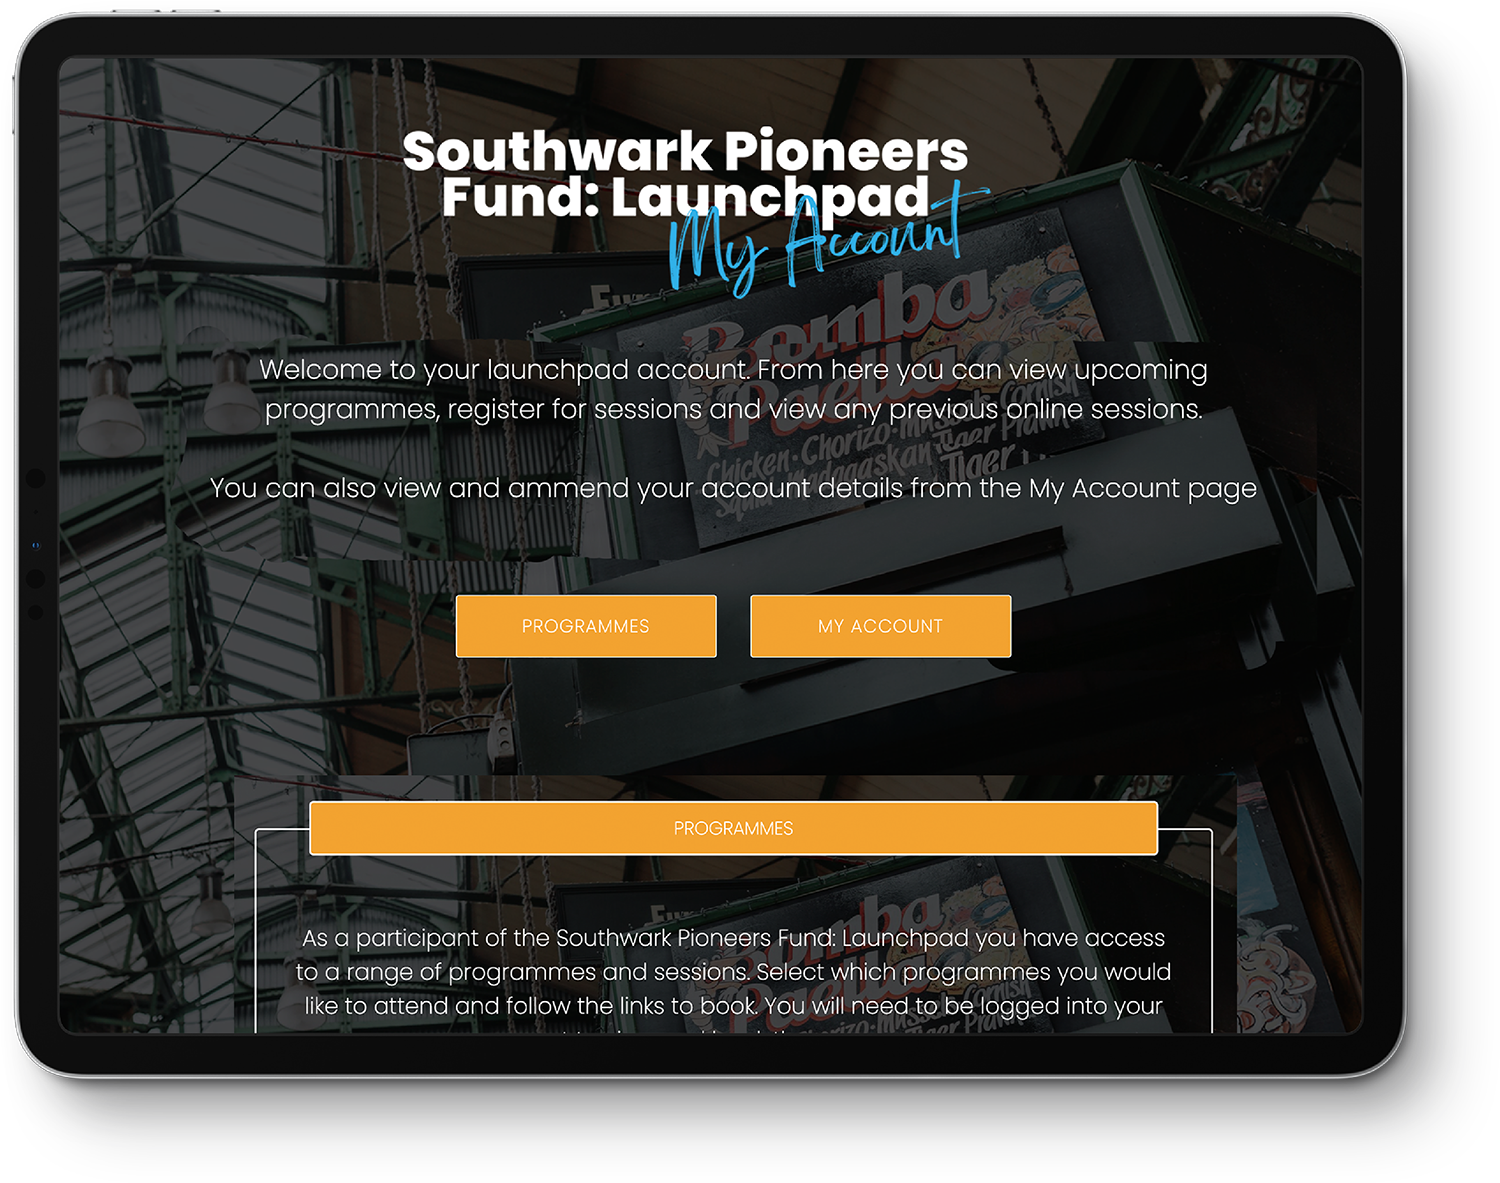 An iPad displaying the home page for the Launchpad portal.